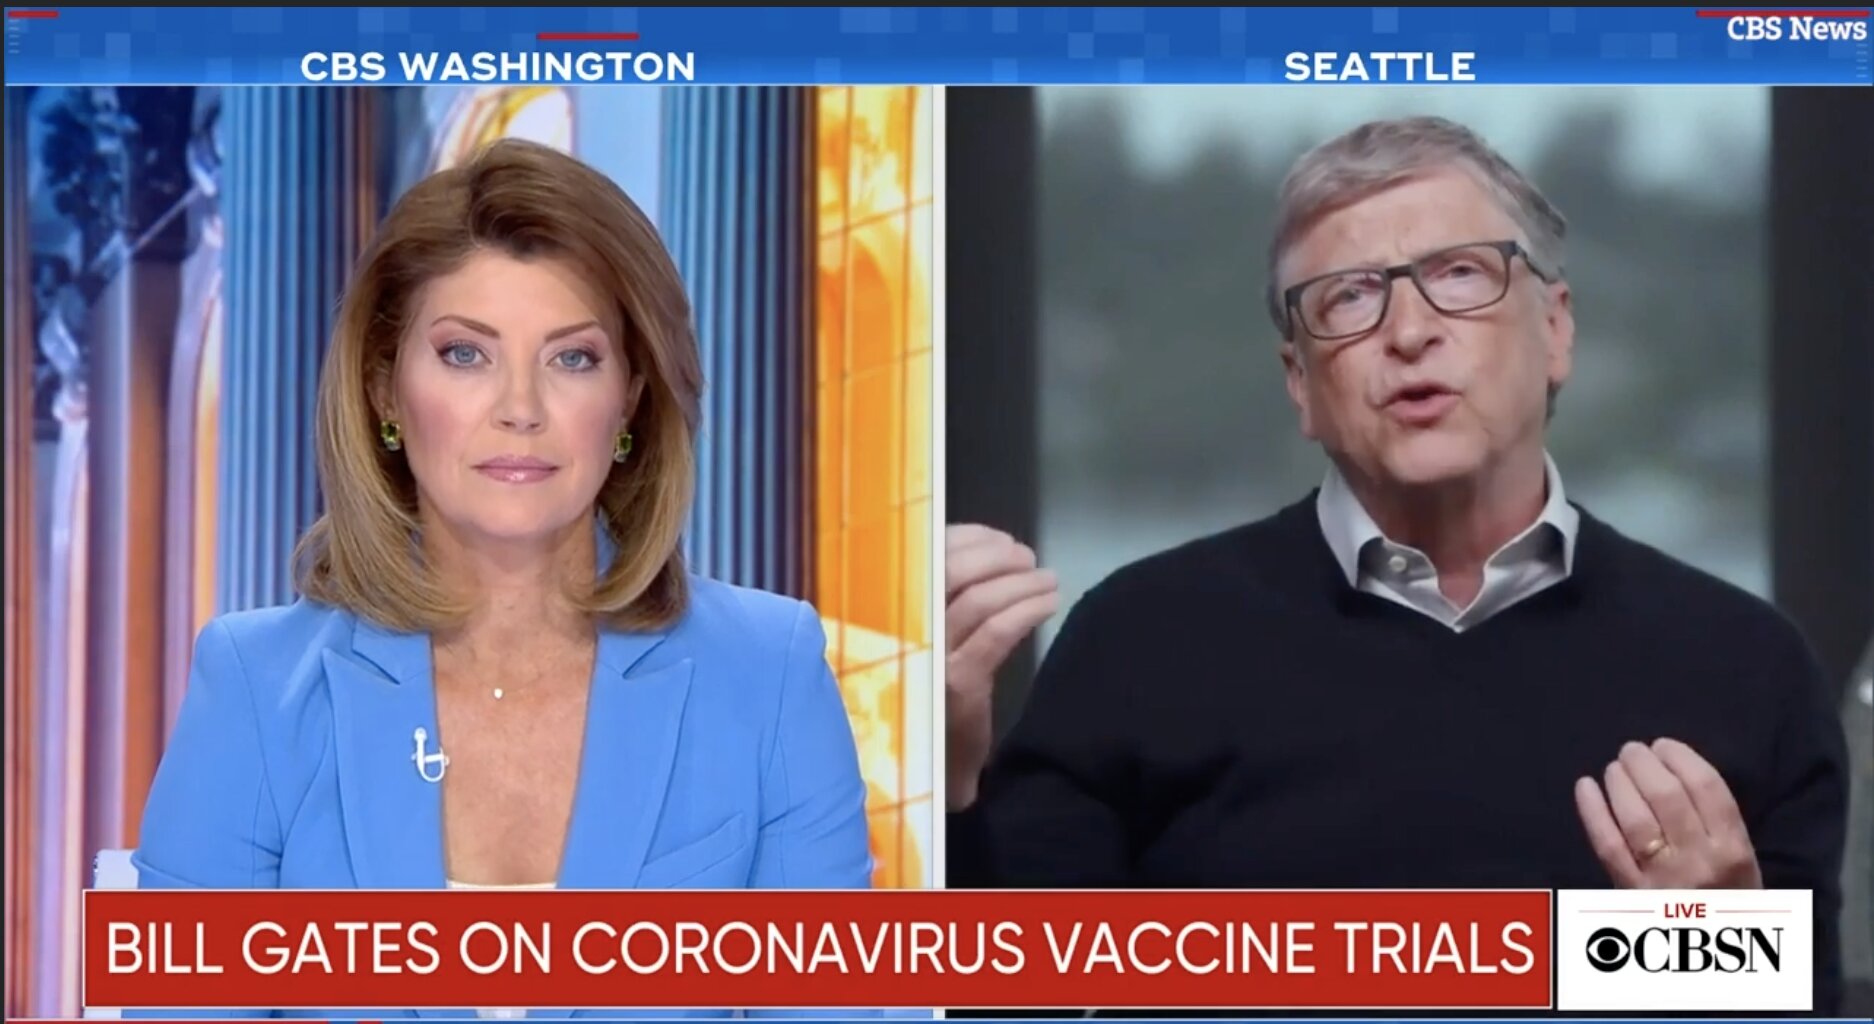 CRIMINAL Bill Gates unhinged: warns multiple coronavirus vaccine doses likely to be needed and schools should stay closed for another YEAR